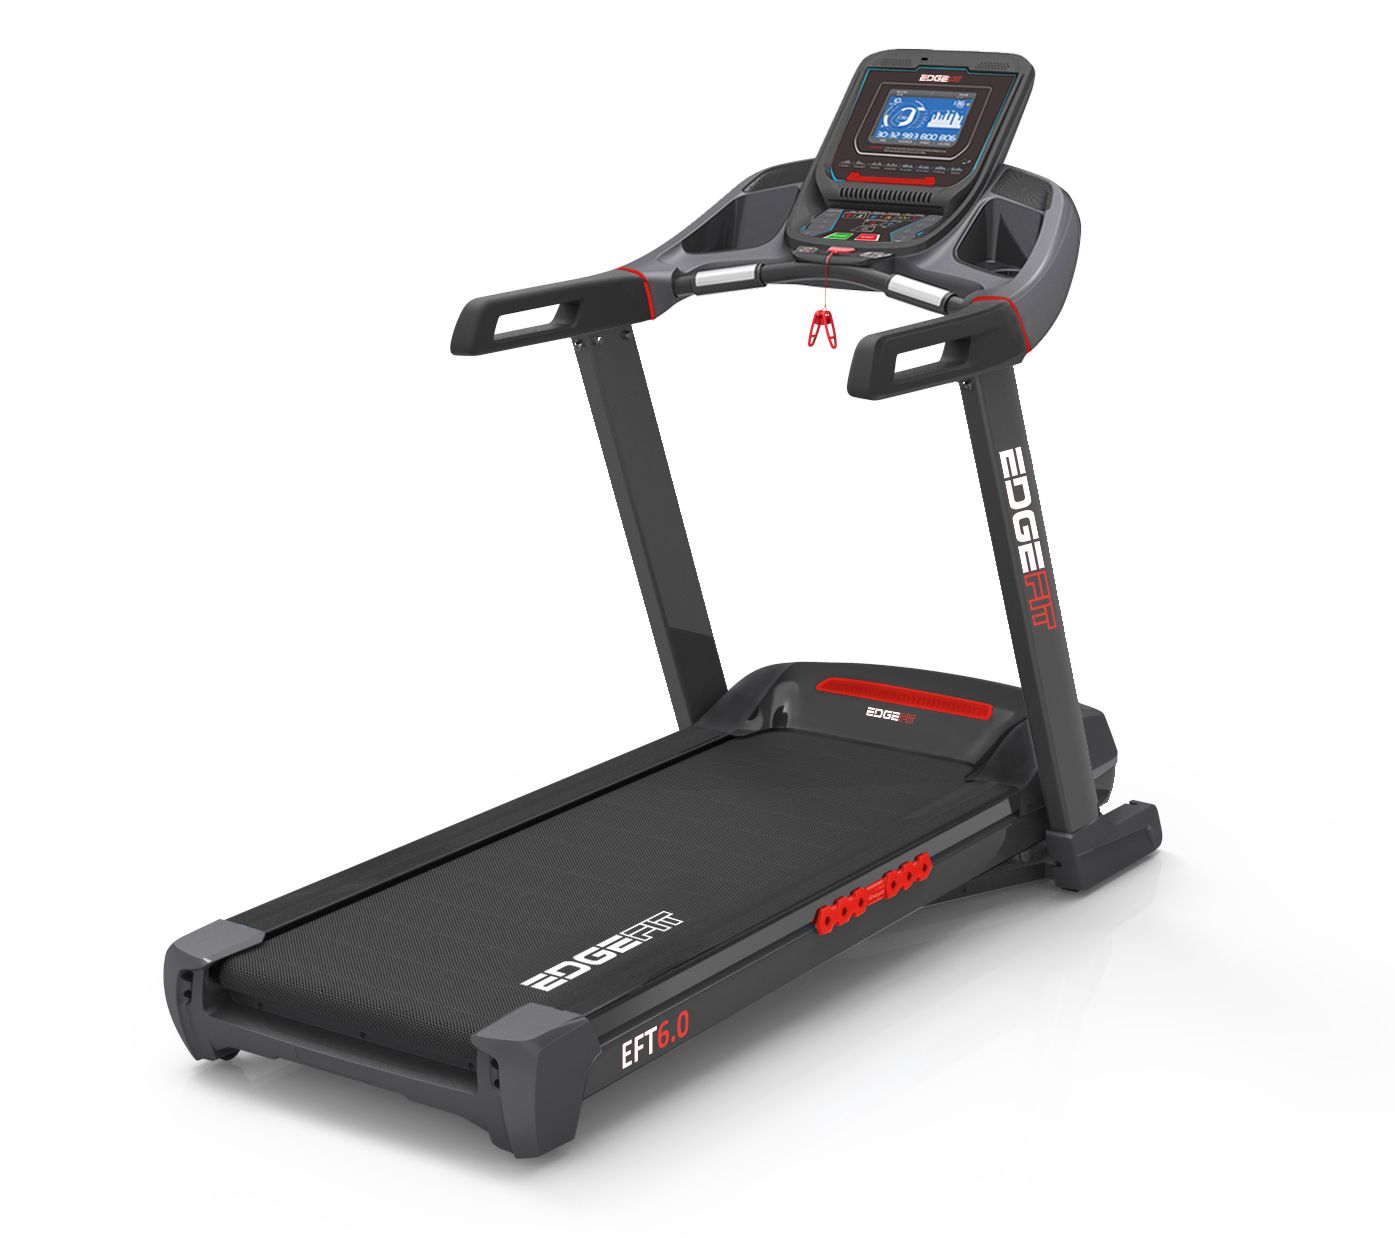 SPECIAL DEAL: Edgefit EFT6.0 Treadmill with FREE Delivery & Installation - SYDNEY METRO AREA